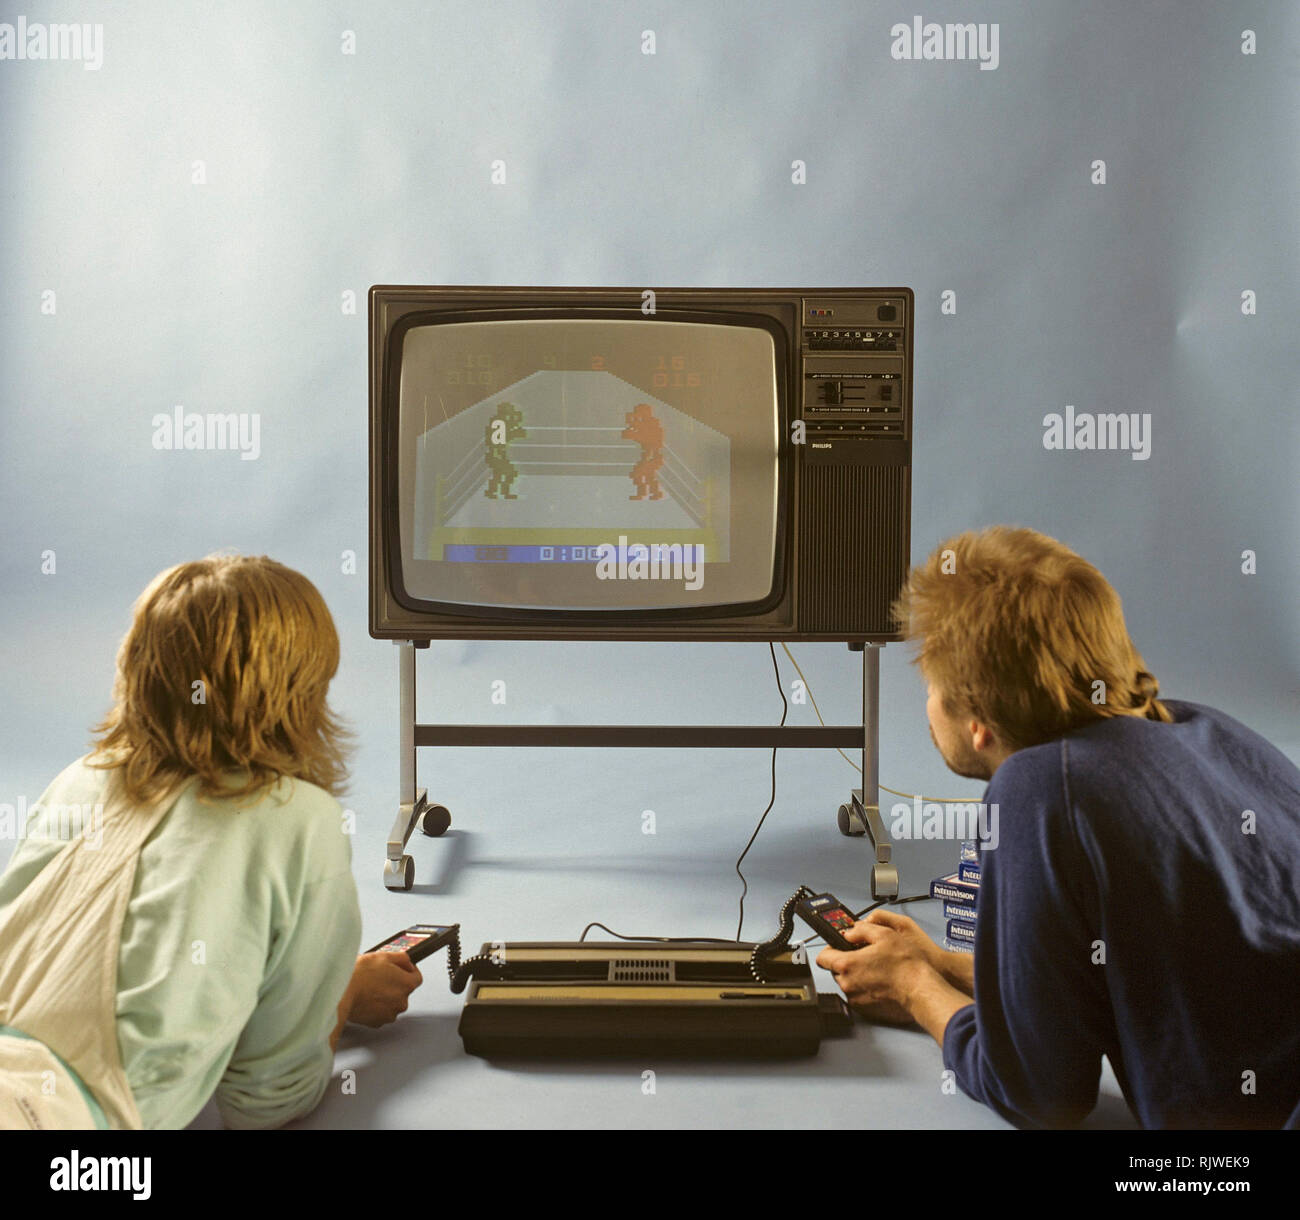 Home video games in the 1980s. A home video game console from Intellivison released by Mattel electronics in 1979. Pictured two people playing a boxing game on a television set. Stock Photo